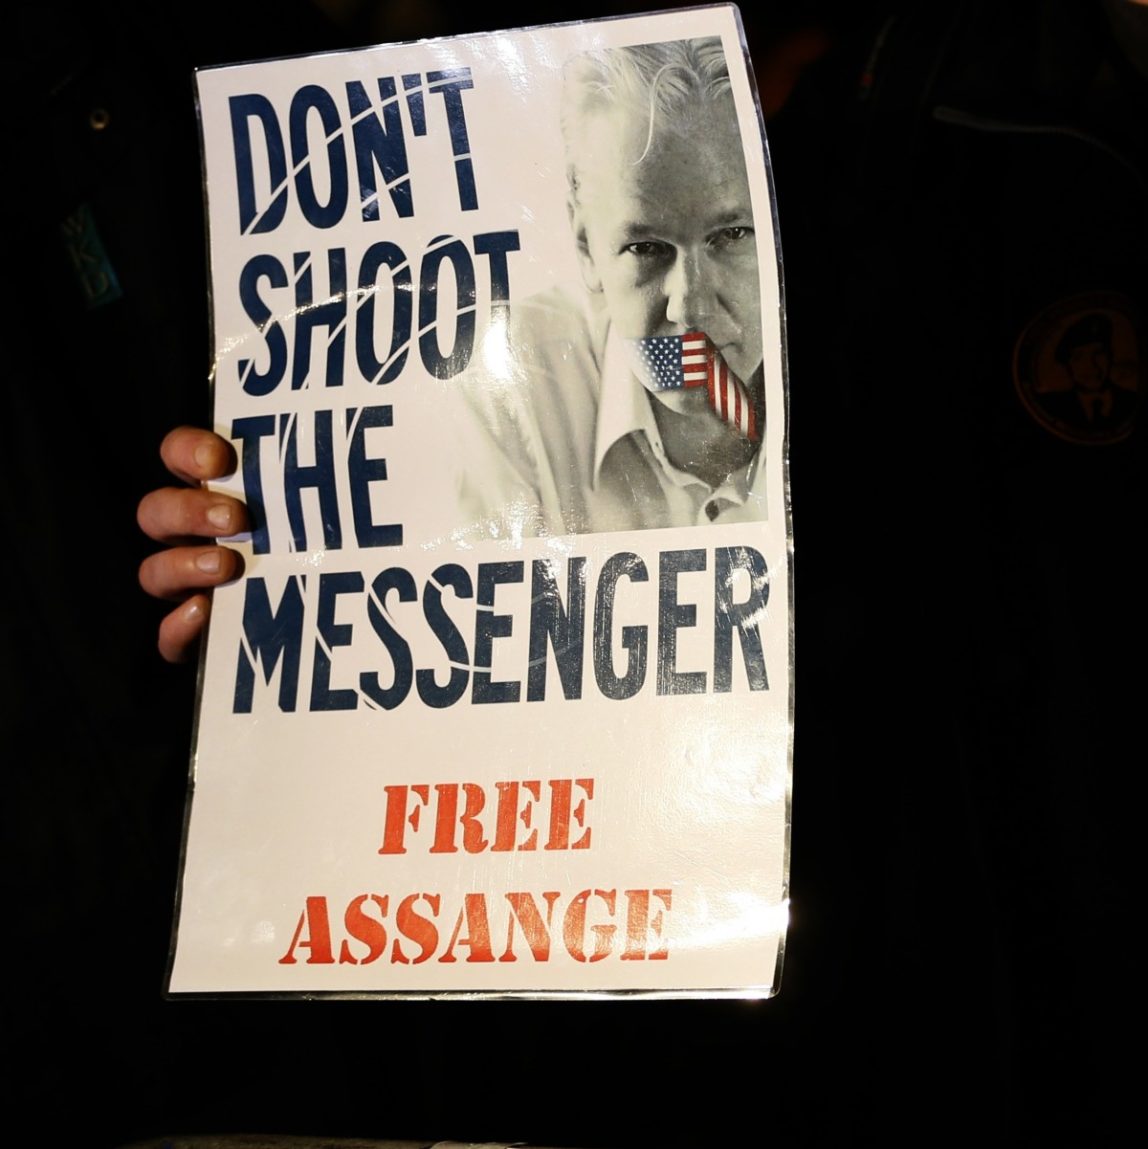 A supporter holds a banner as he waits for Julian Assange, founder of WikiLeaks to speak to the media and members of the public from a balcony at the Ecuadorian Embassy in London, Thursday, Dec. 20, 2012. (AP Photo/Kirsty Wigglesworth)